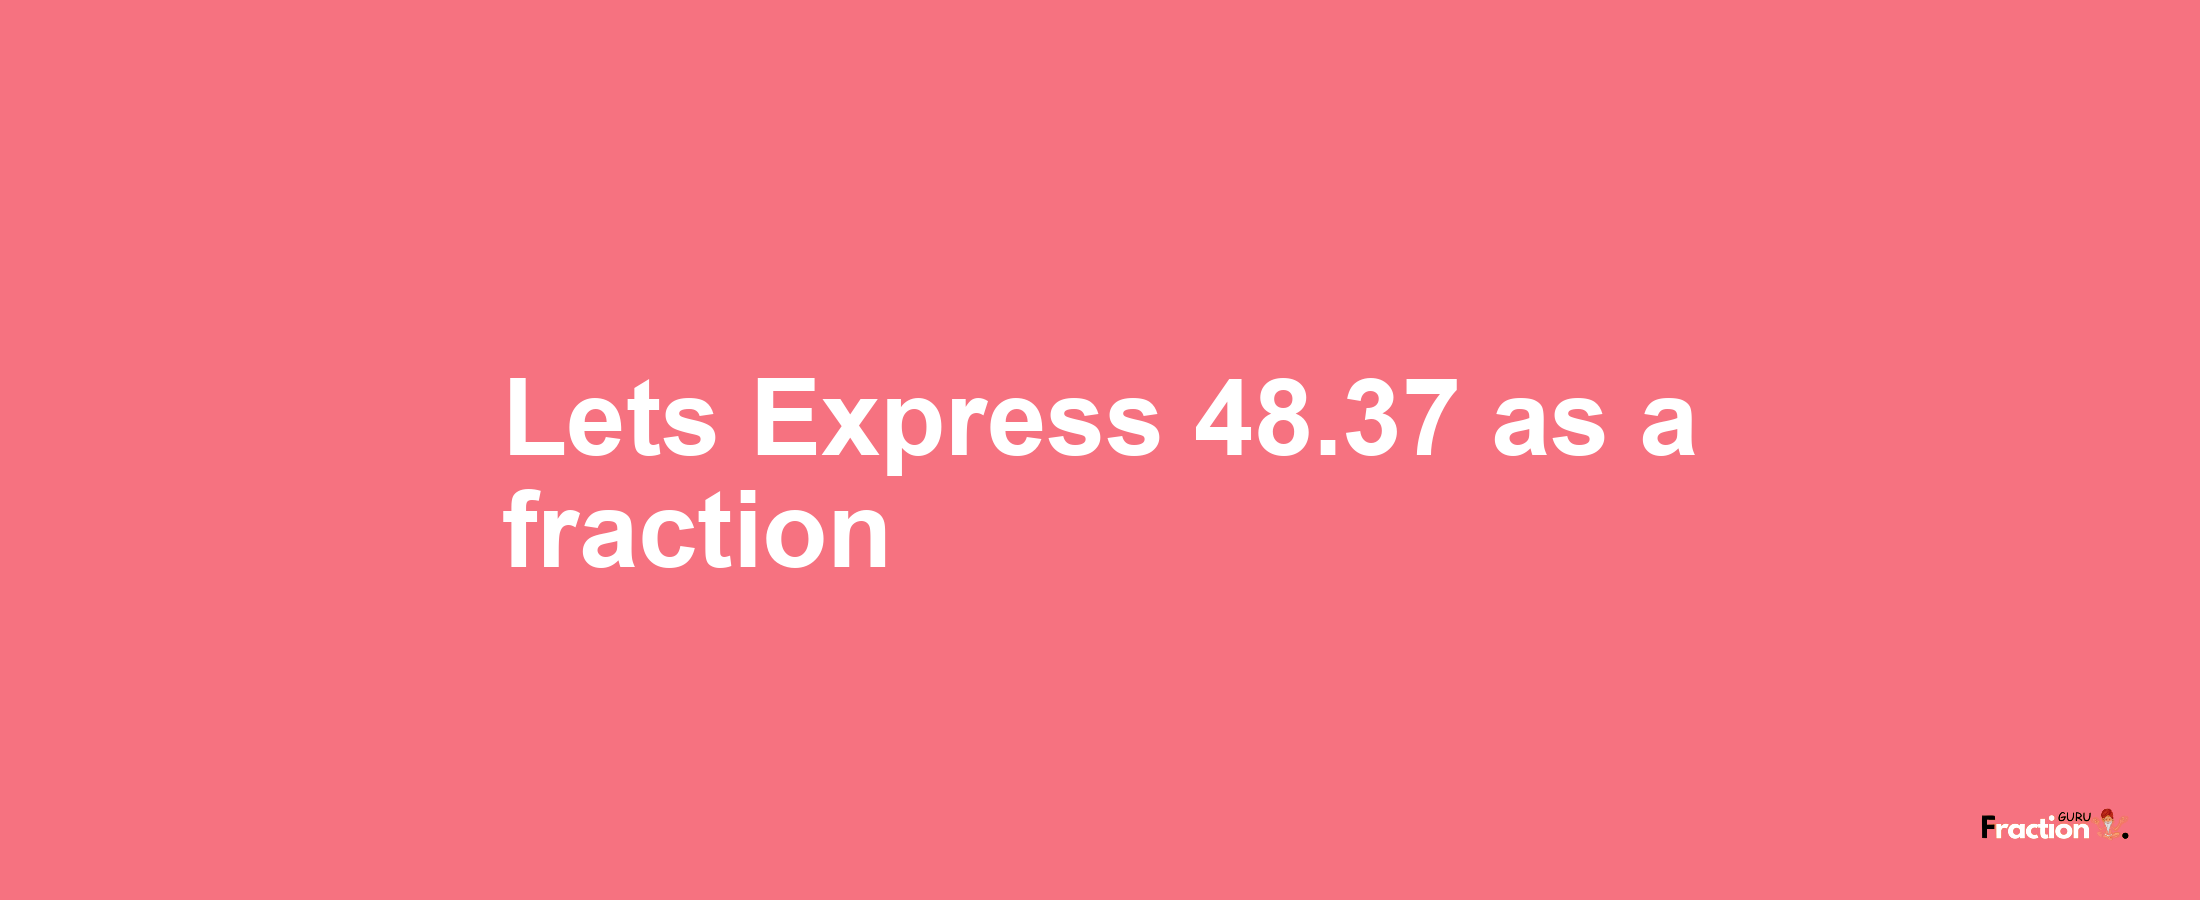 Lets Express 48.37 as afraction